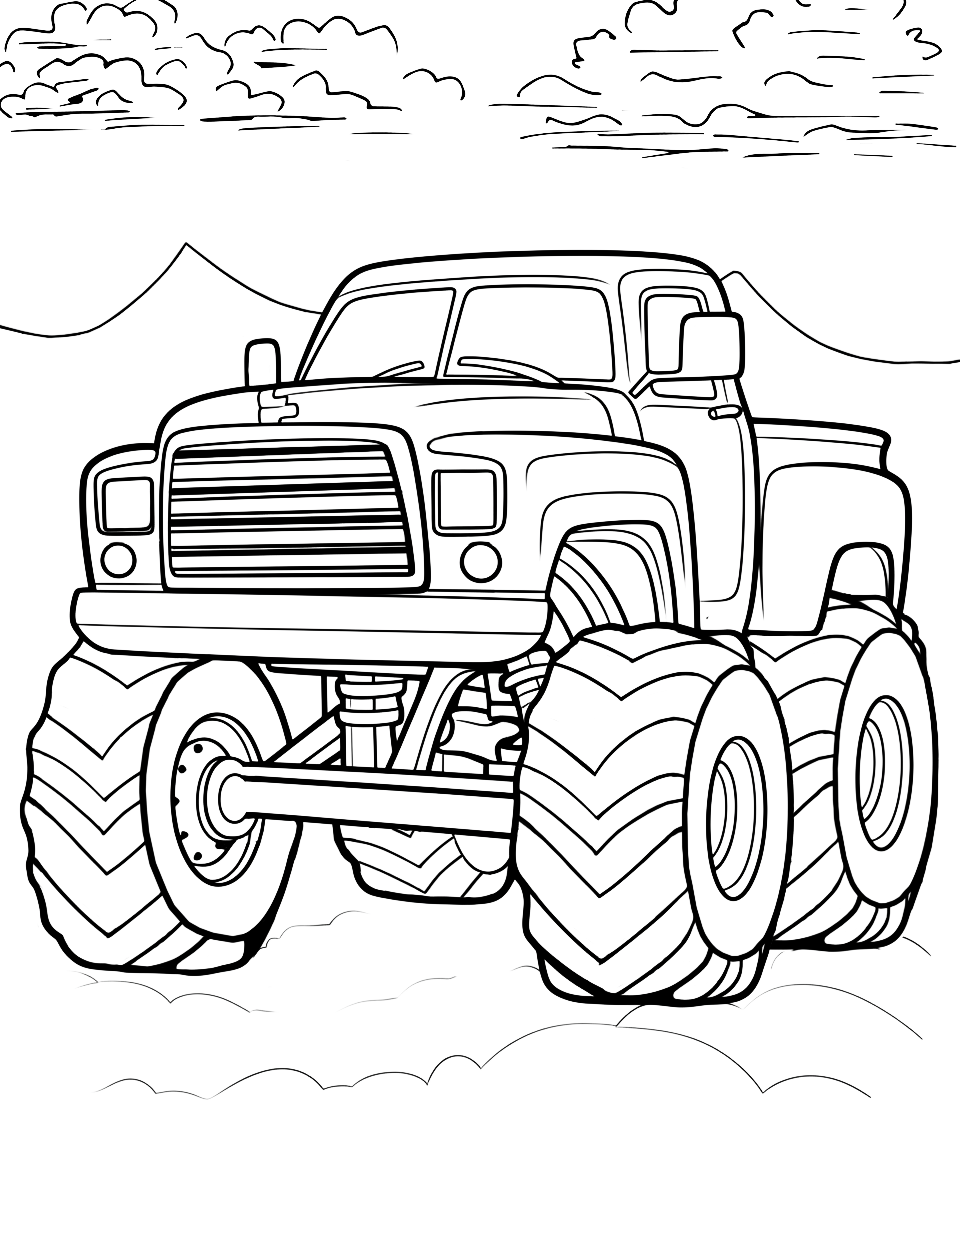 Easy-Going Truck Monster Coloring Page - A simple design of a monster truck for younger kids to color.